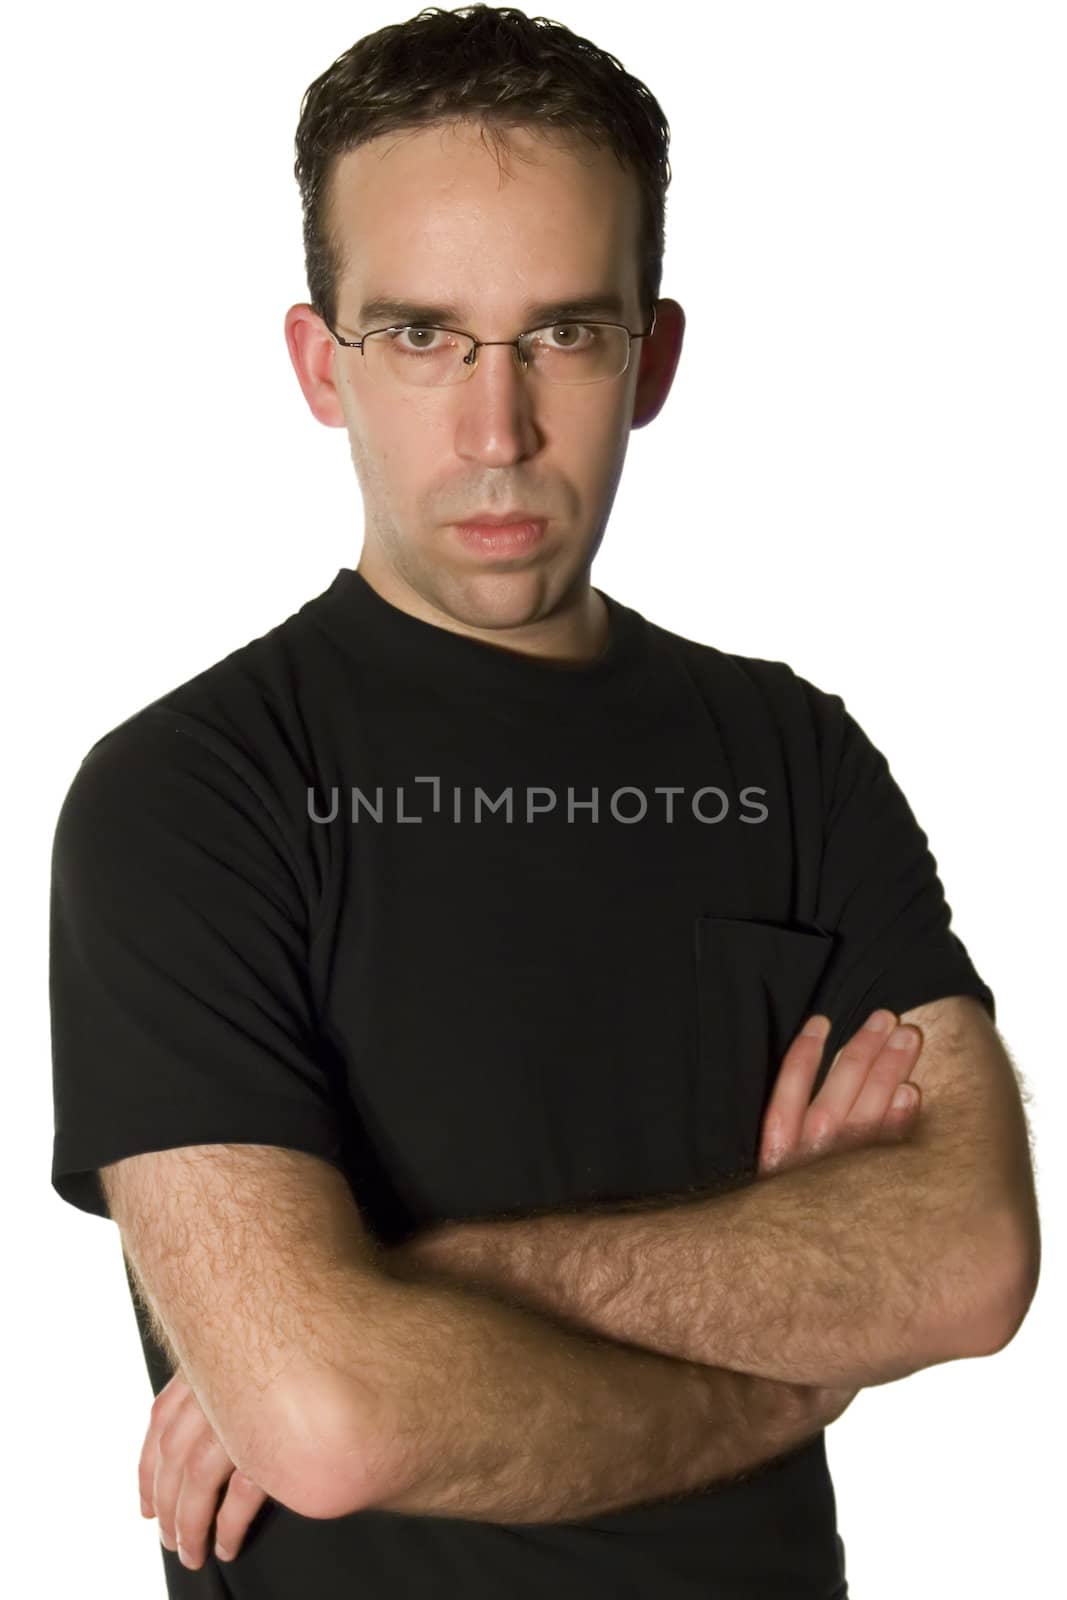 A young man with a stern look on his face, isolated against a white background